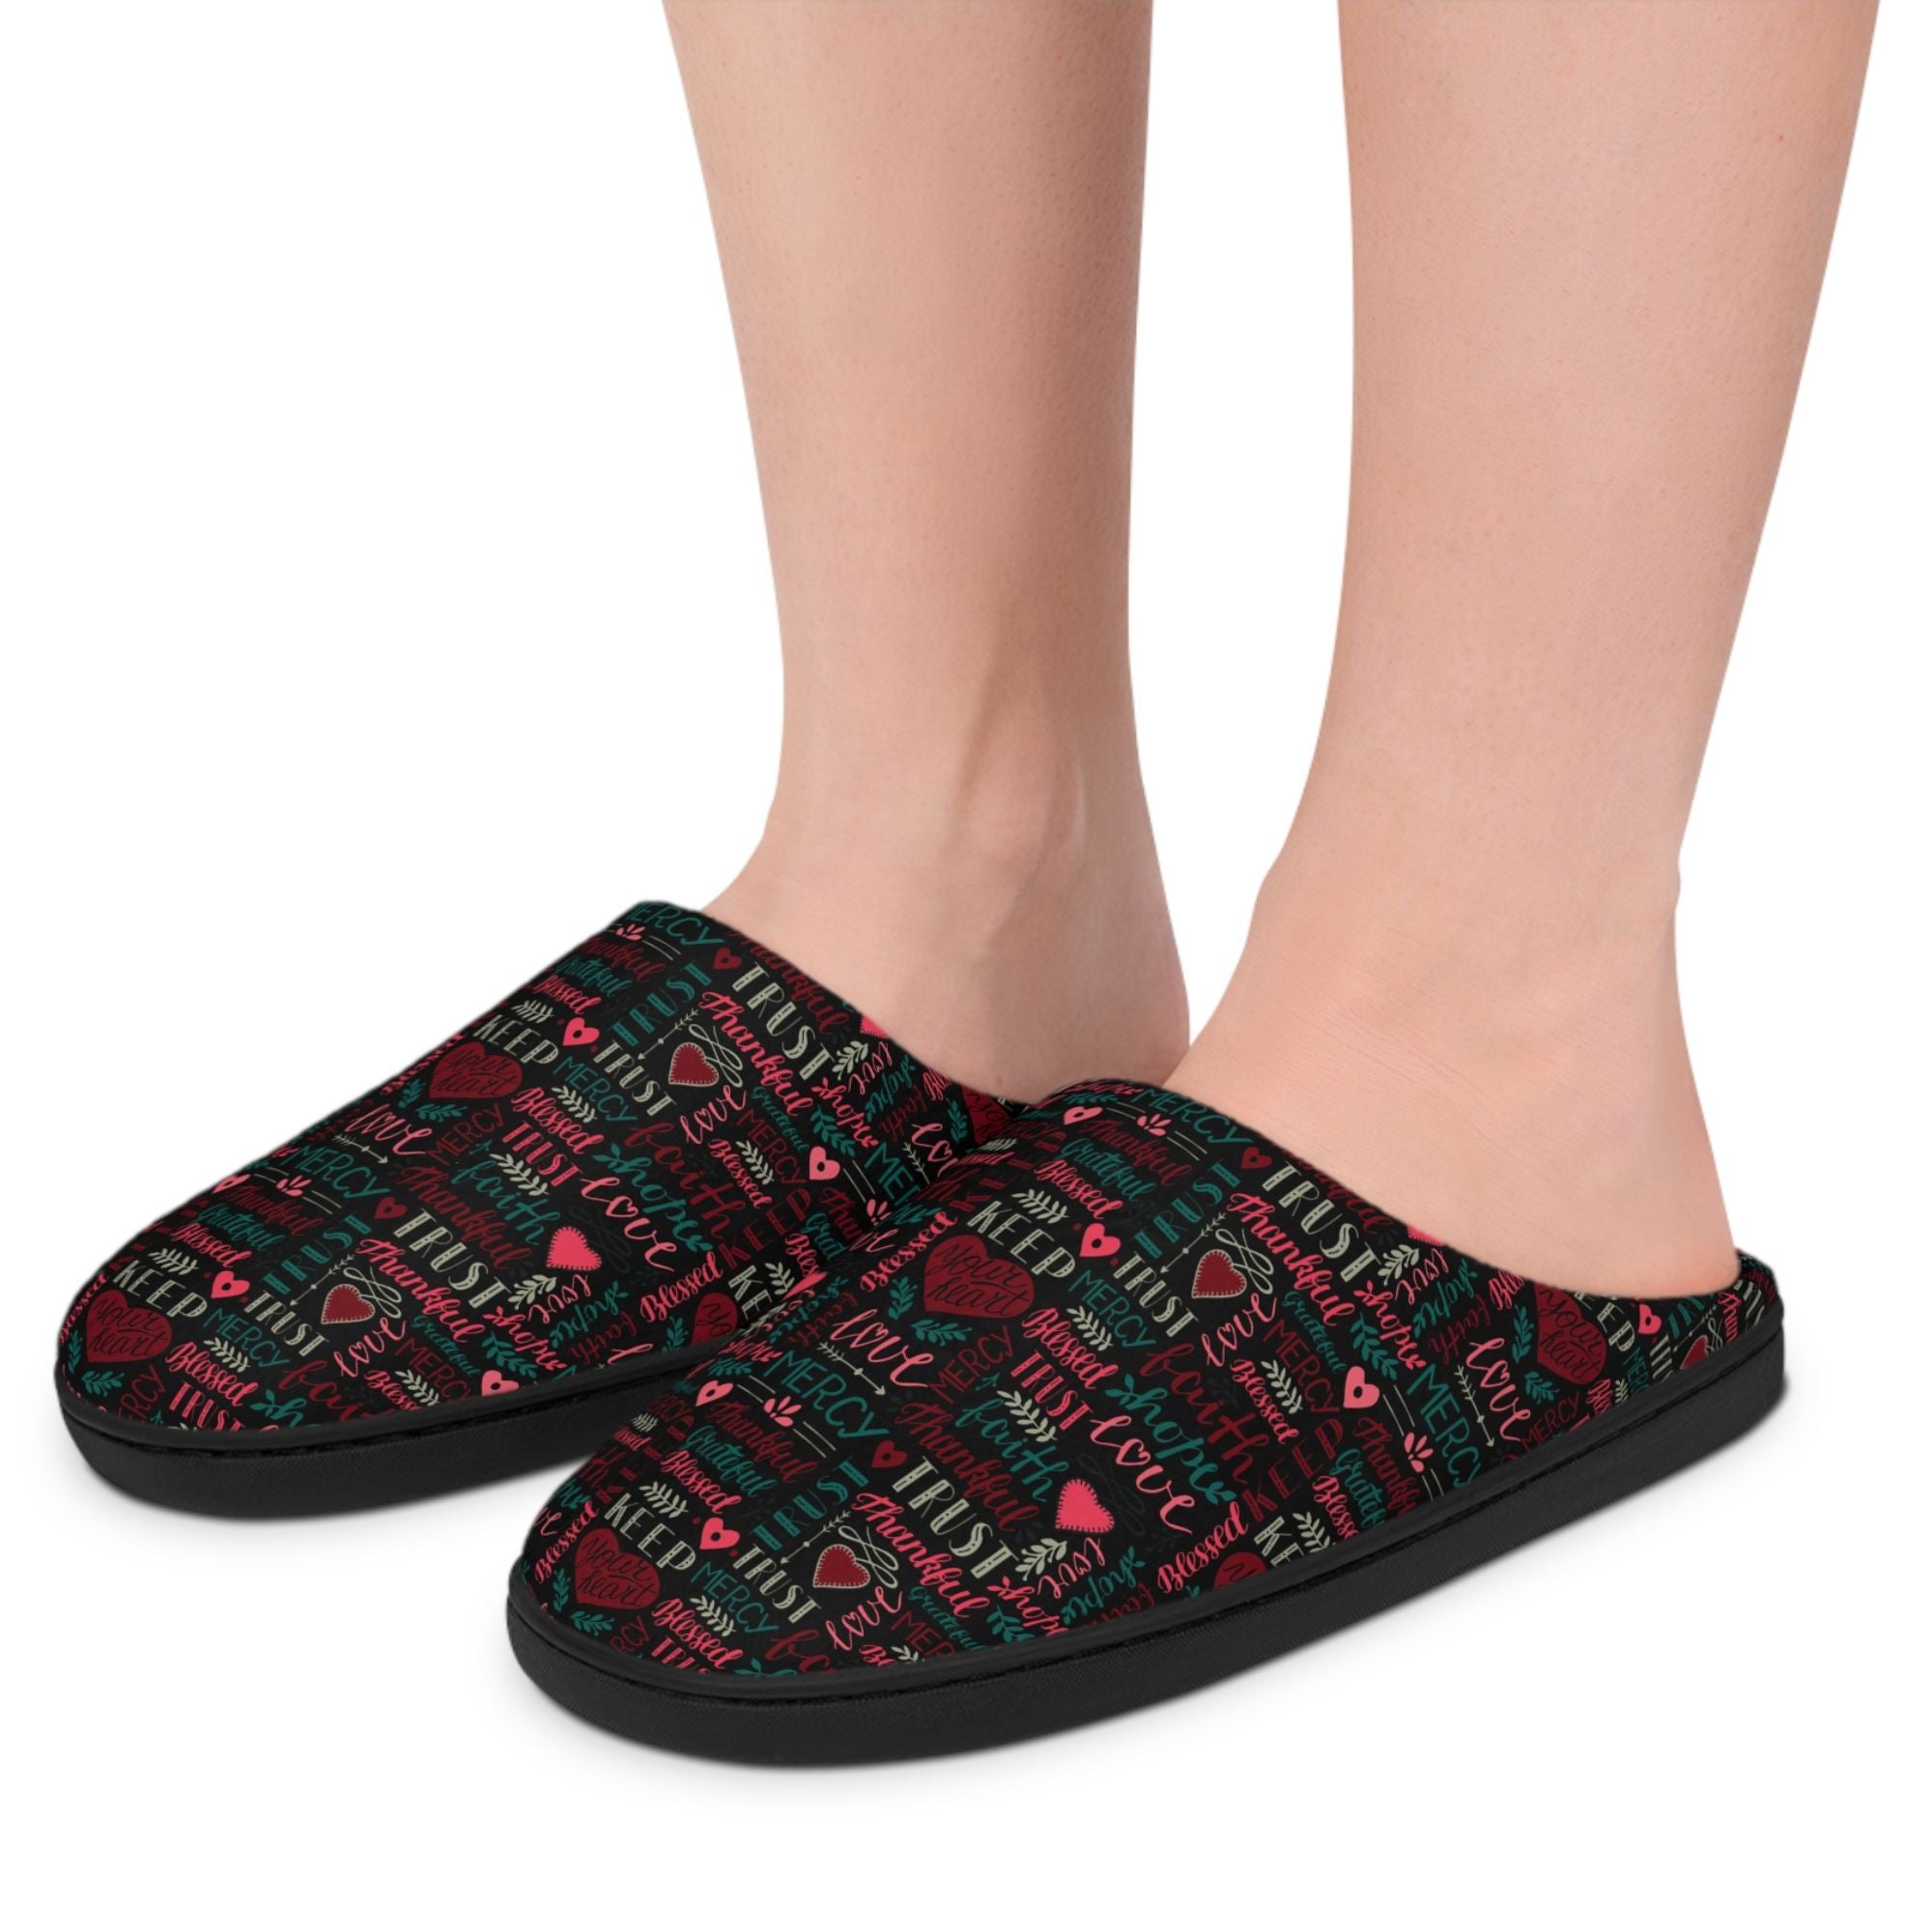 Faith Hope Love Women's Indoor Slippers - Matching Pajama Set and Lounge / Pajama Pants Available Size: US 7 - 8 Color: Black sole Jesus Passion Apparel